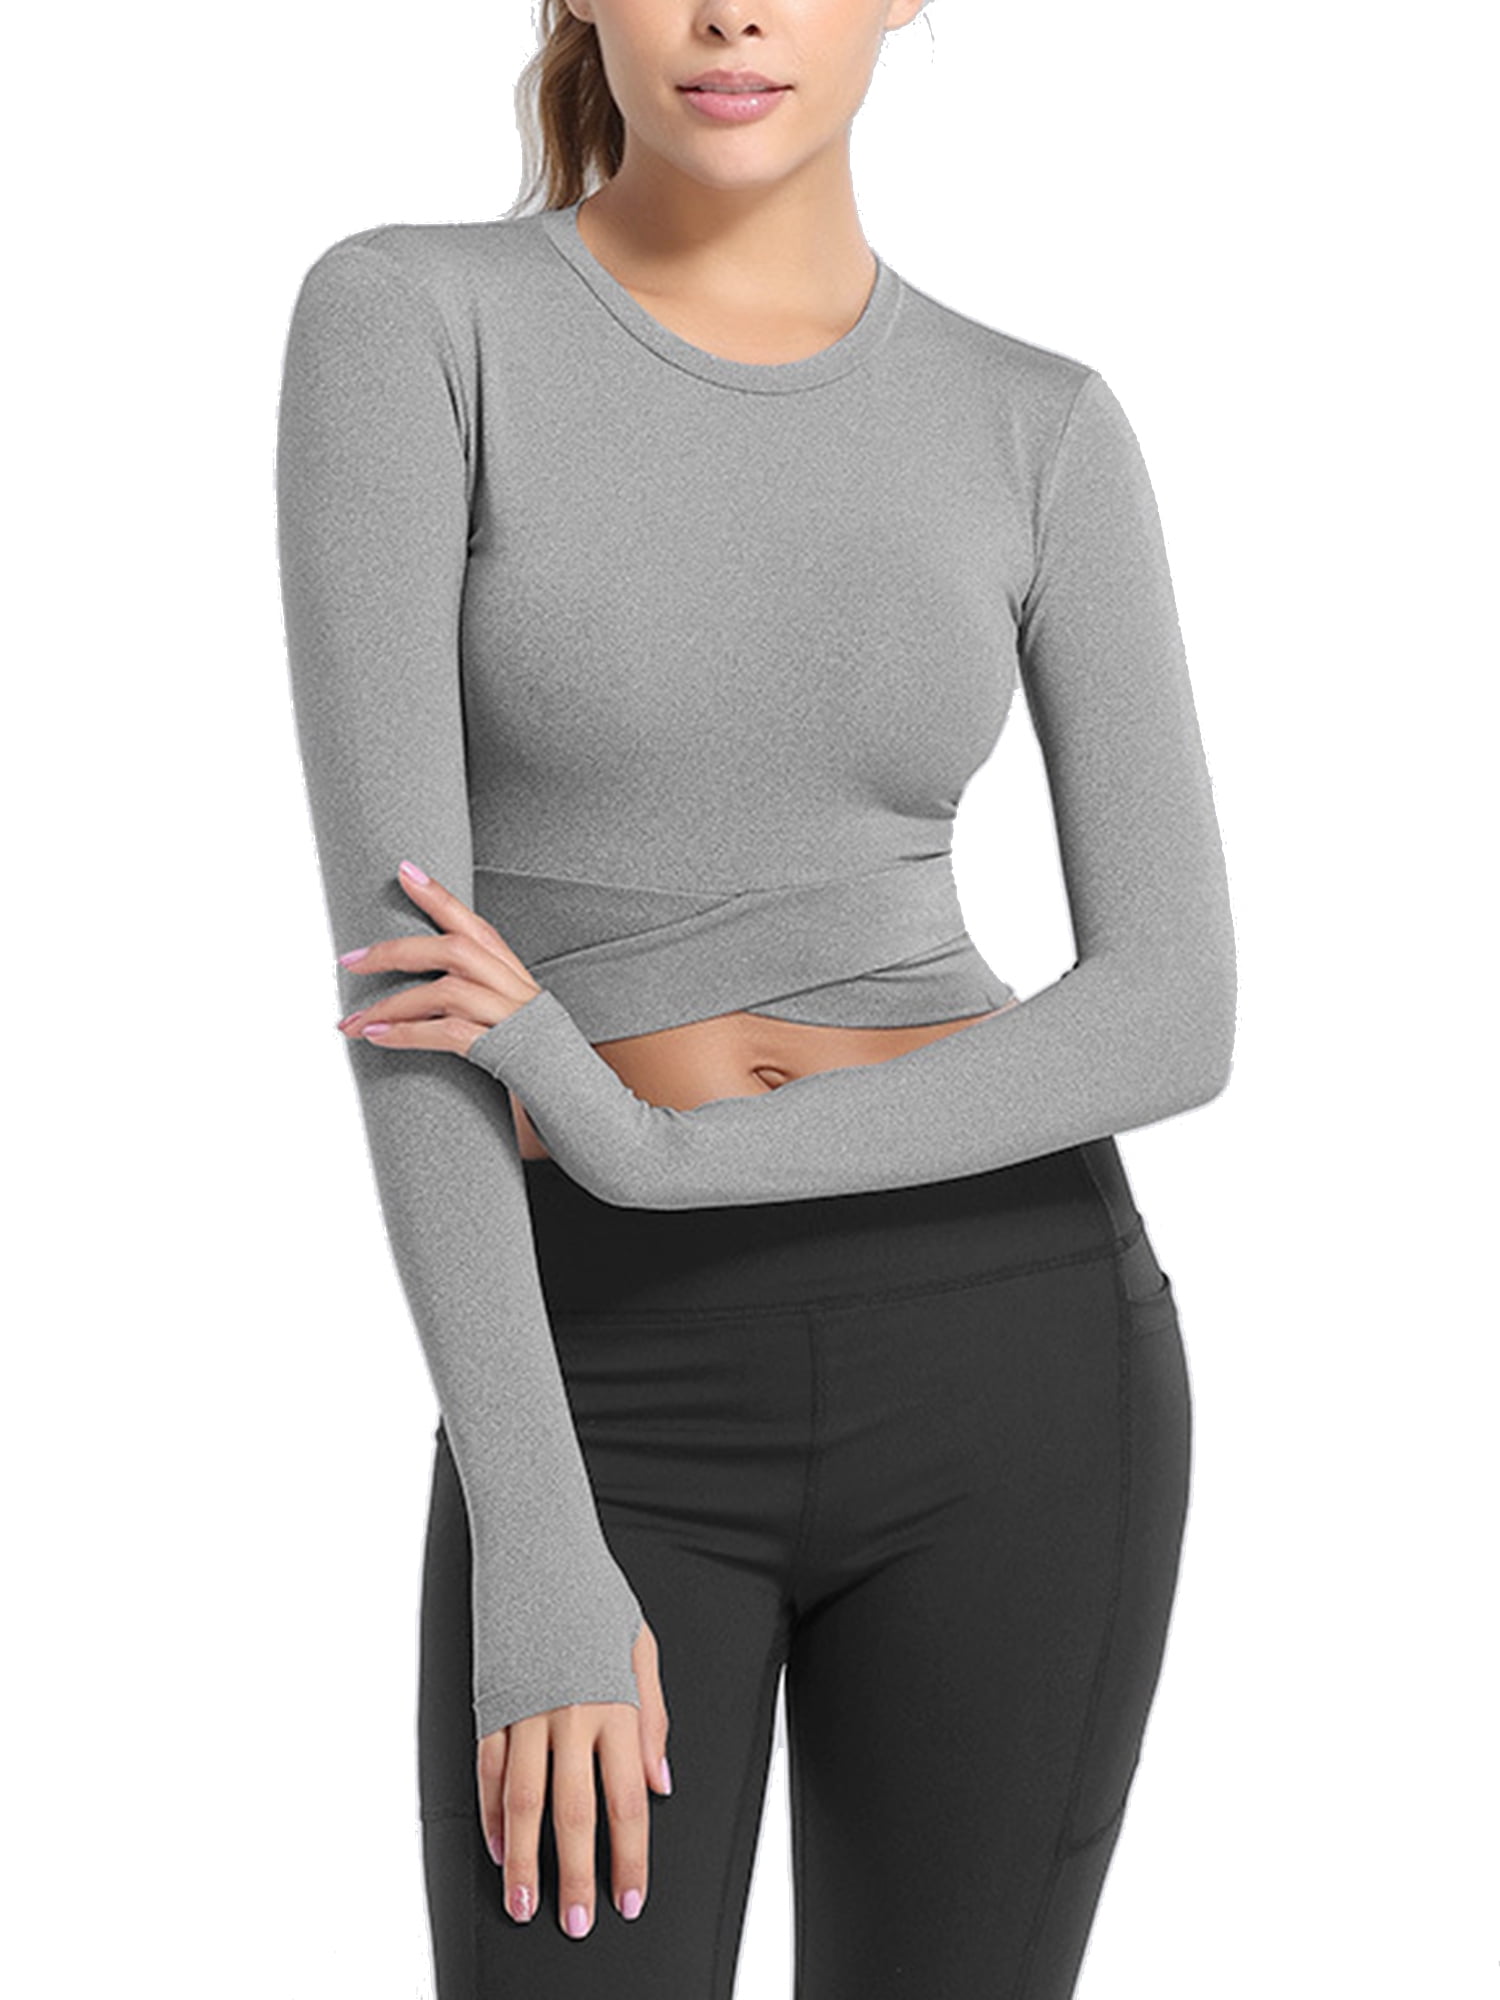 Capreze Workout Yoga Tops for Women Crop Top Compression Long Sleeve  Fitness Athletic Yoga Sports Shirt 